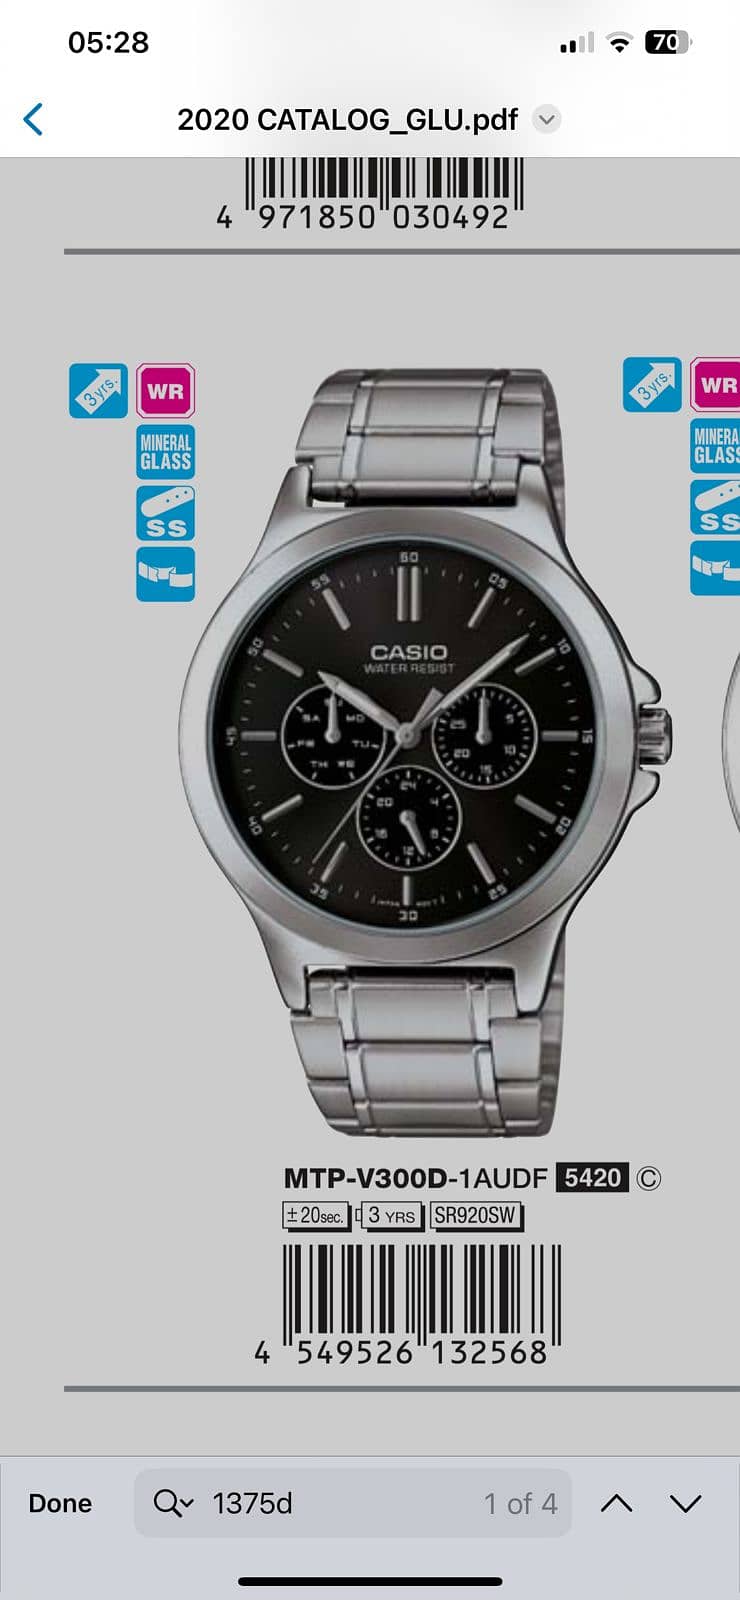 Casio watches on discounted prices 5